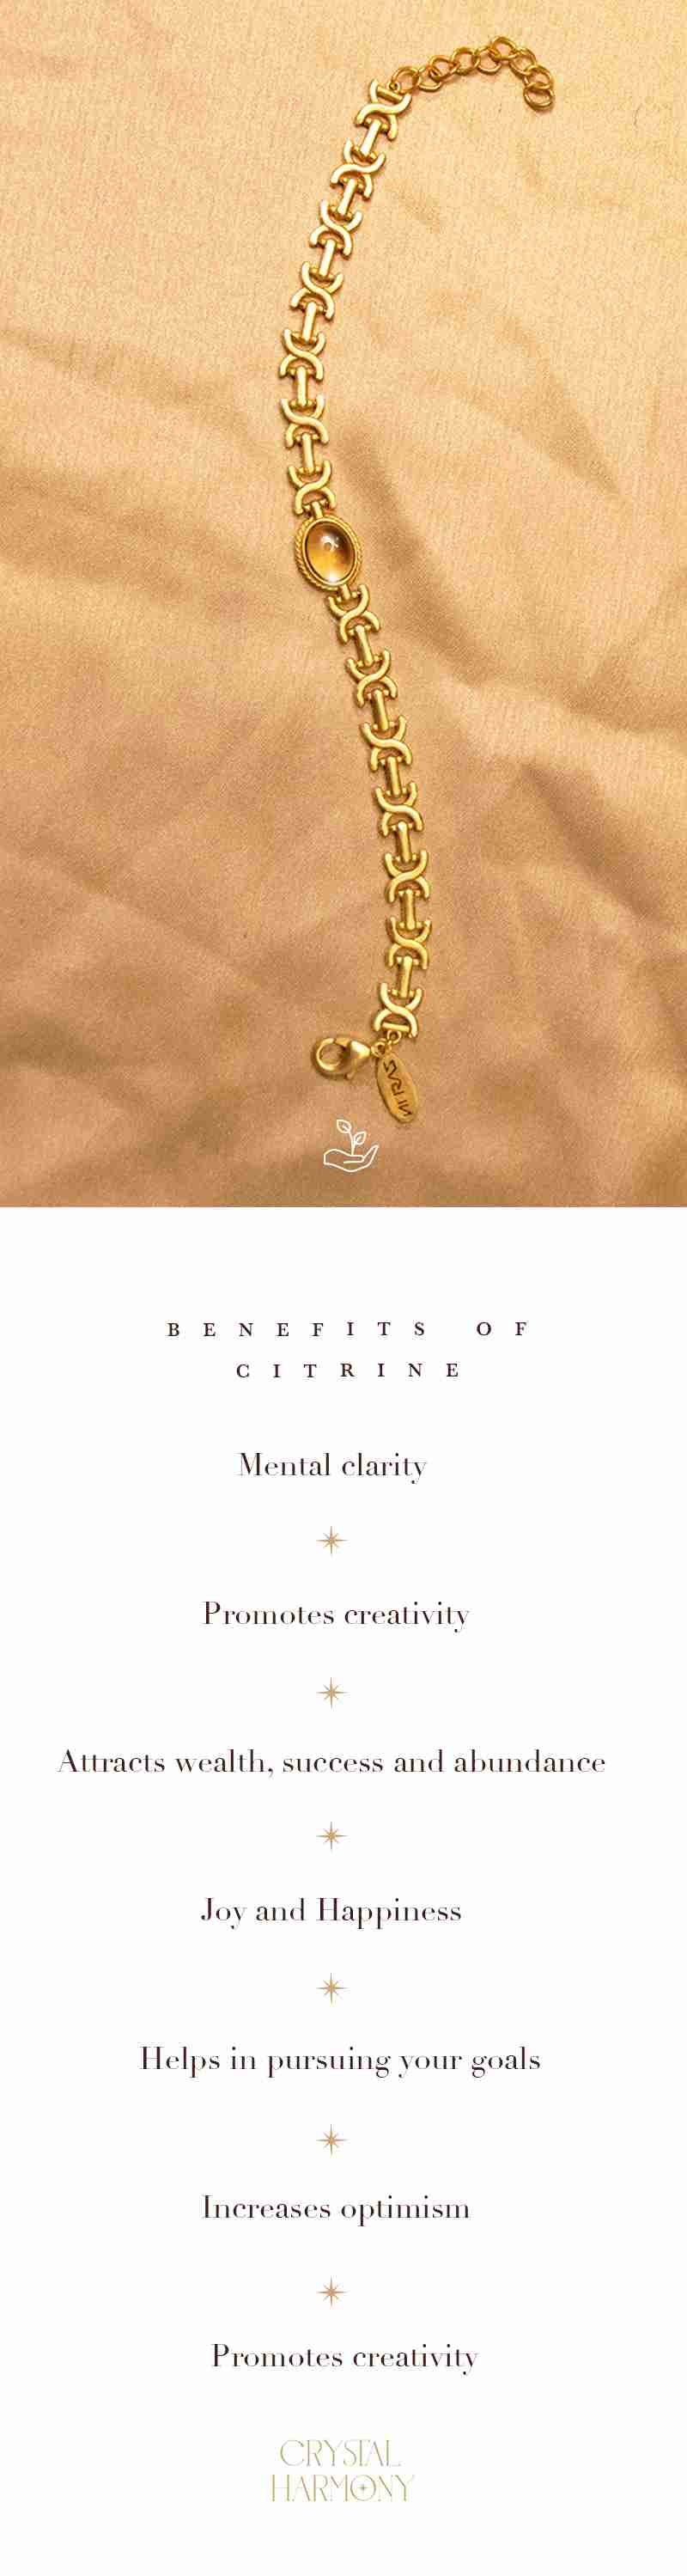 Citrine Crystal: Meaning, Benefits, Uses, Healing & More